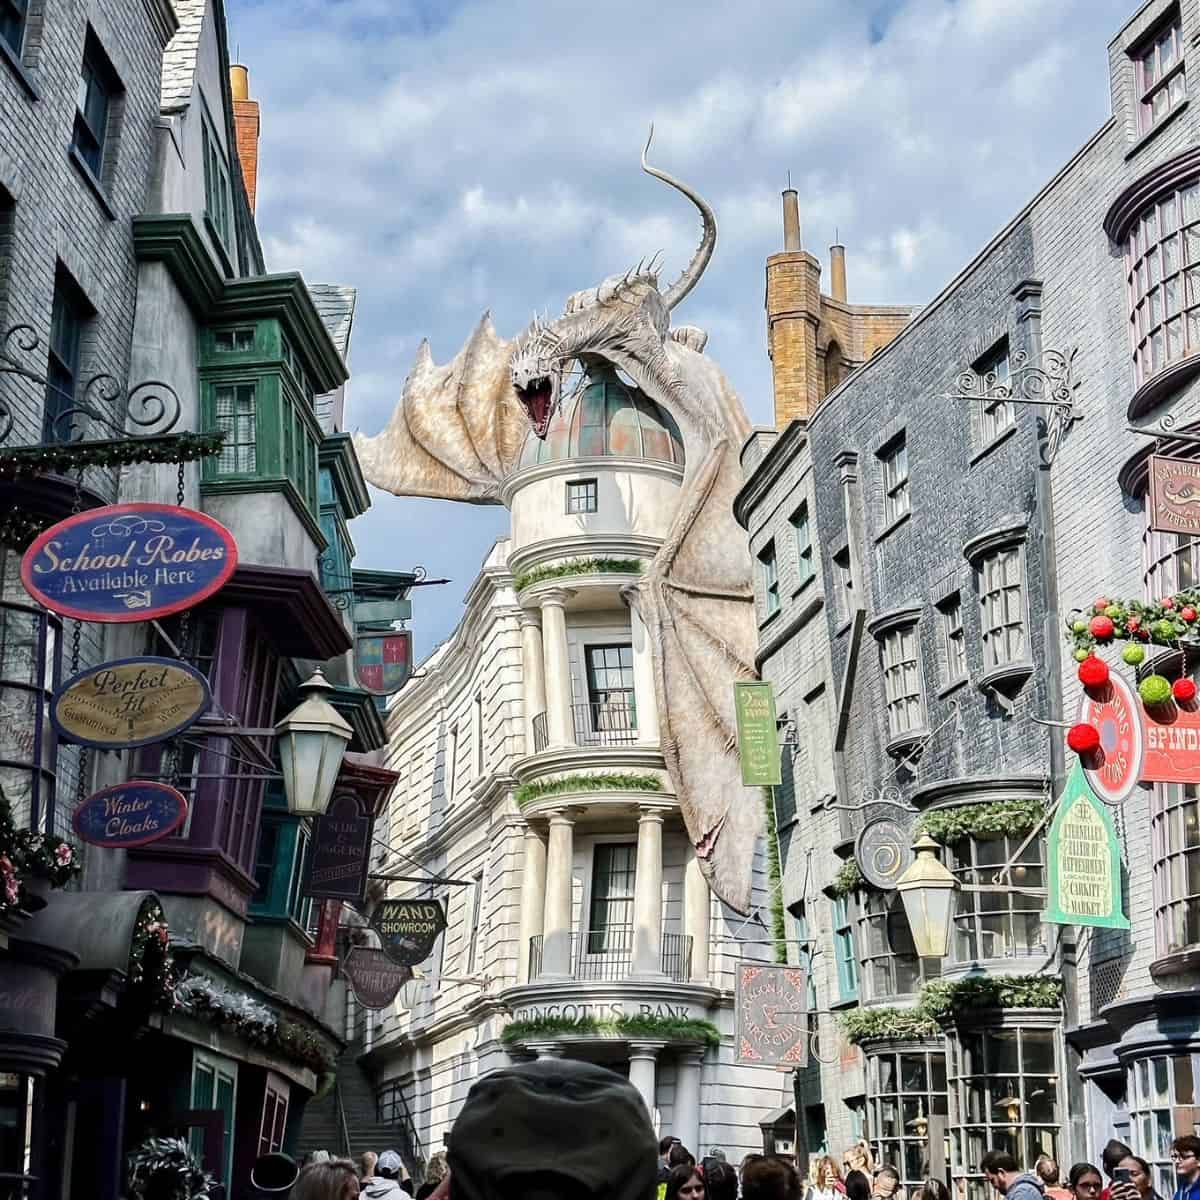 diagon alley at the wizarding world of harry potter in Orlando florida